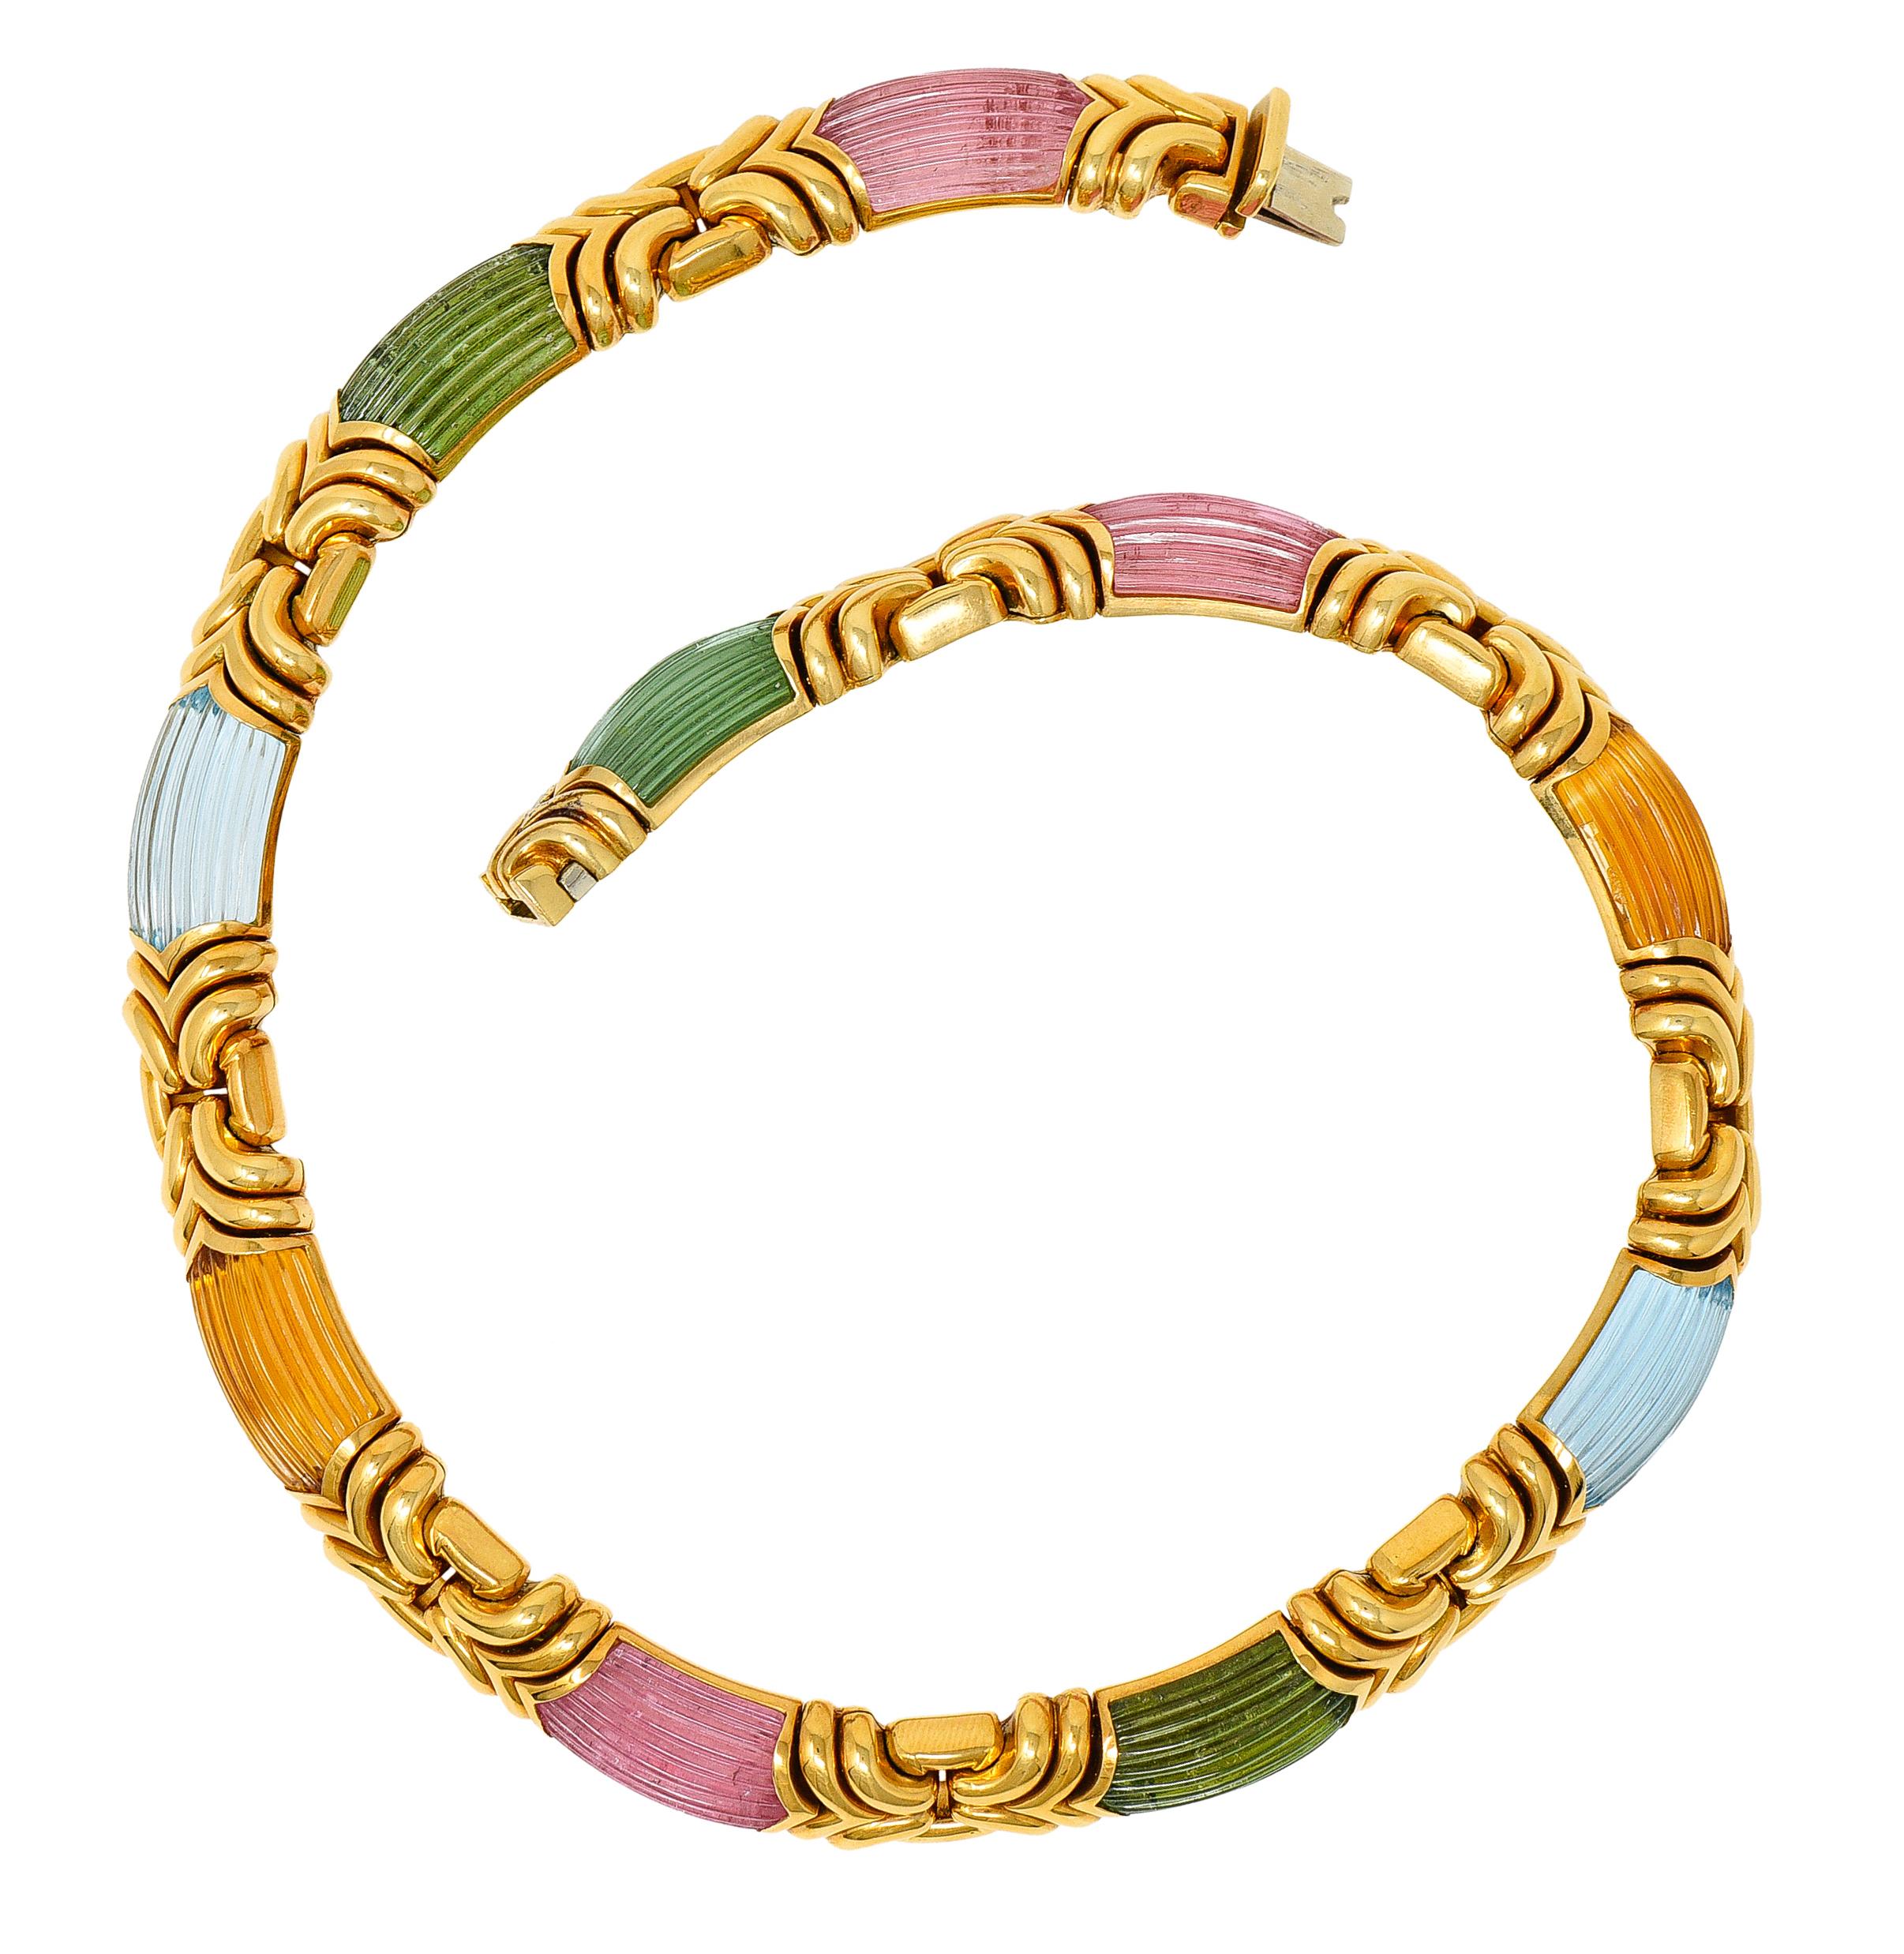 Collar necklace is comprised of chevron gold links in a stylized buckle motif

Alternating with elongated barrel shaped gemstone stations - measuring approximately 22.0 x 10.7 mm

Featuring blue topaz, green tourmaline, pink tourmaline, and citrine